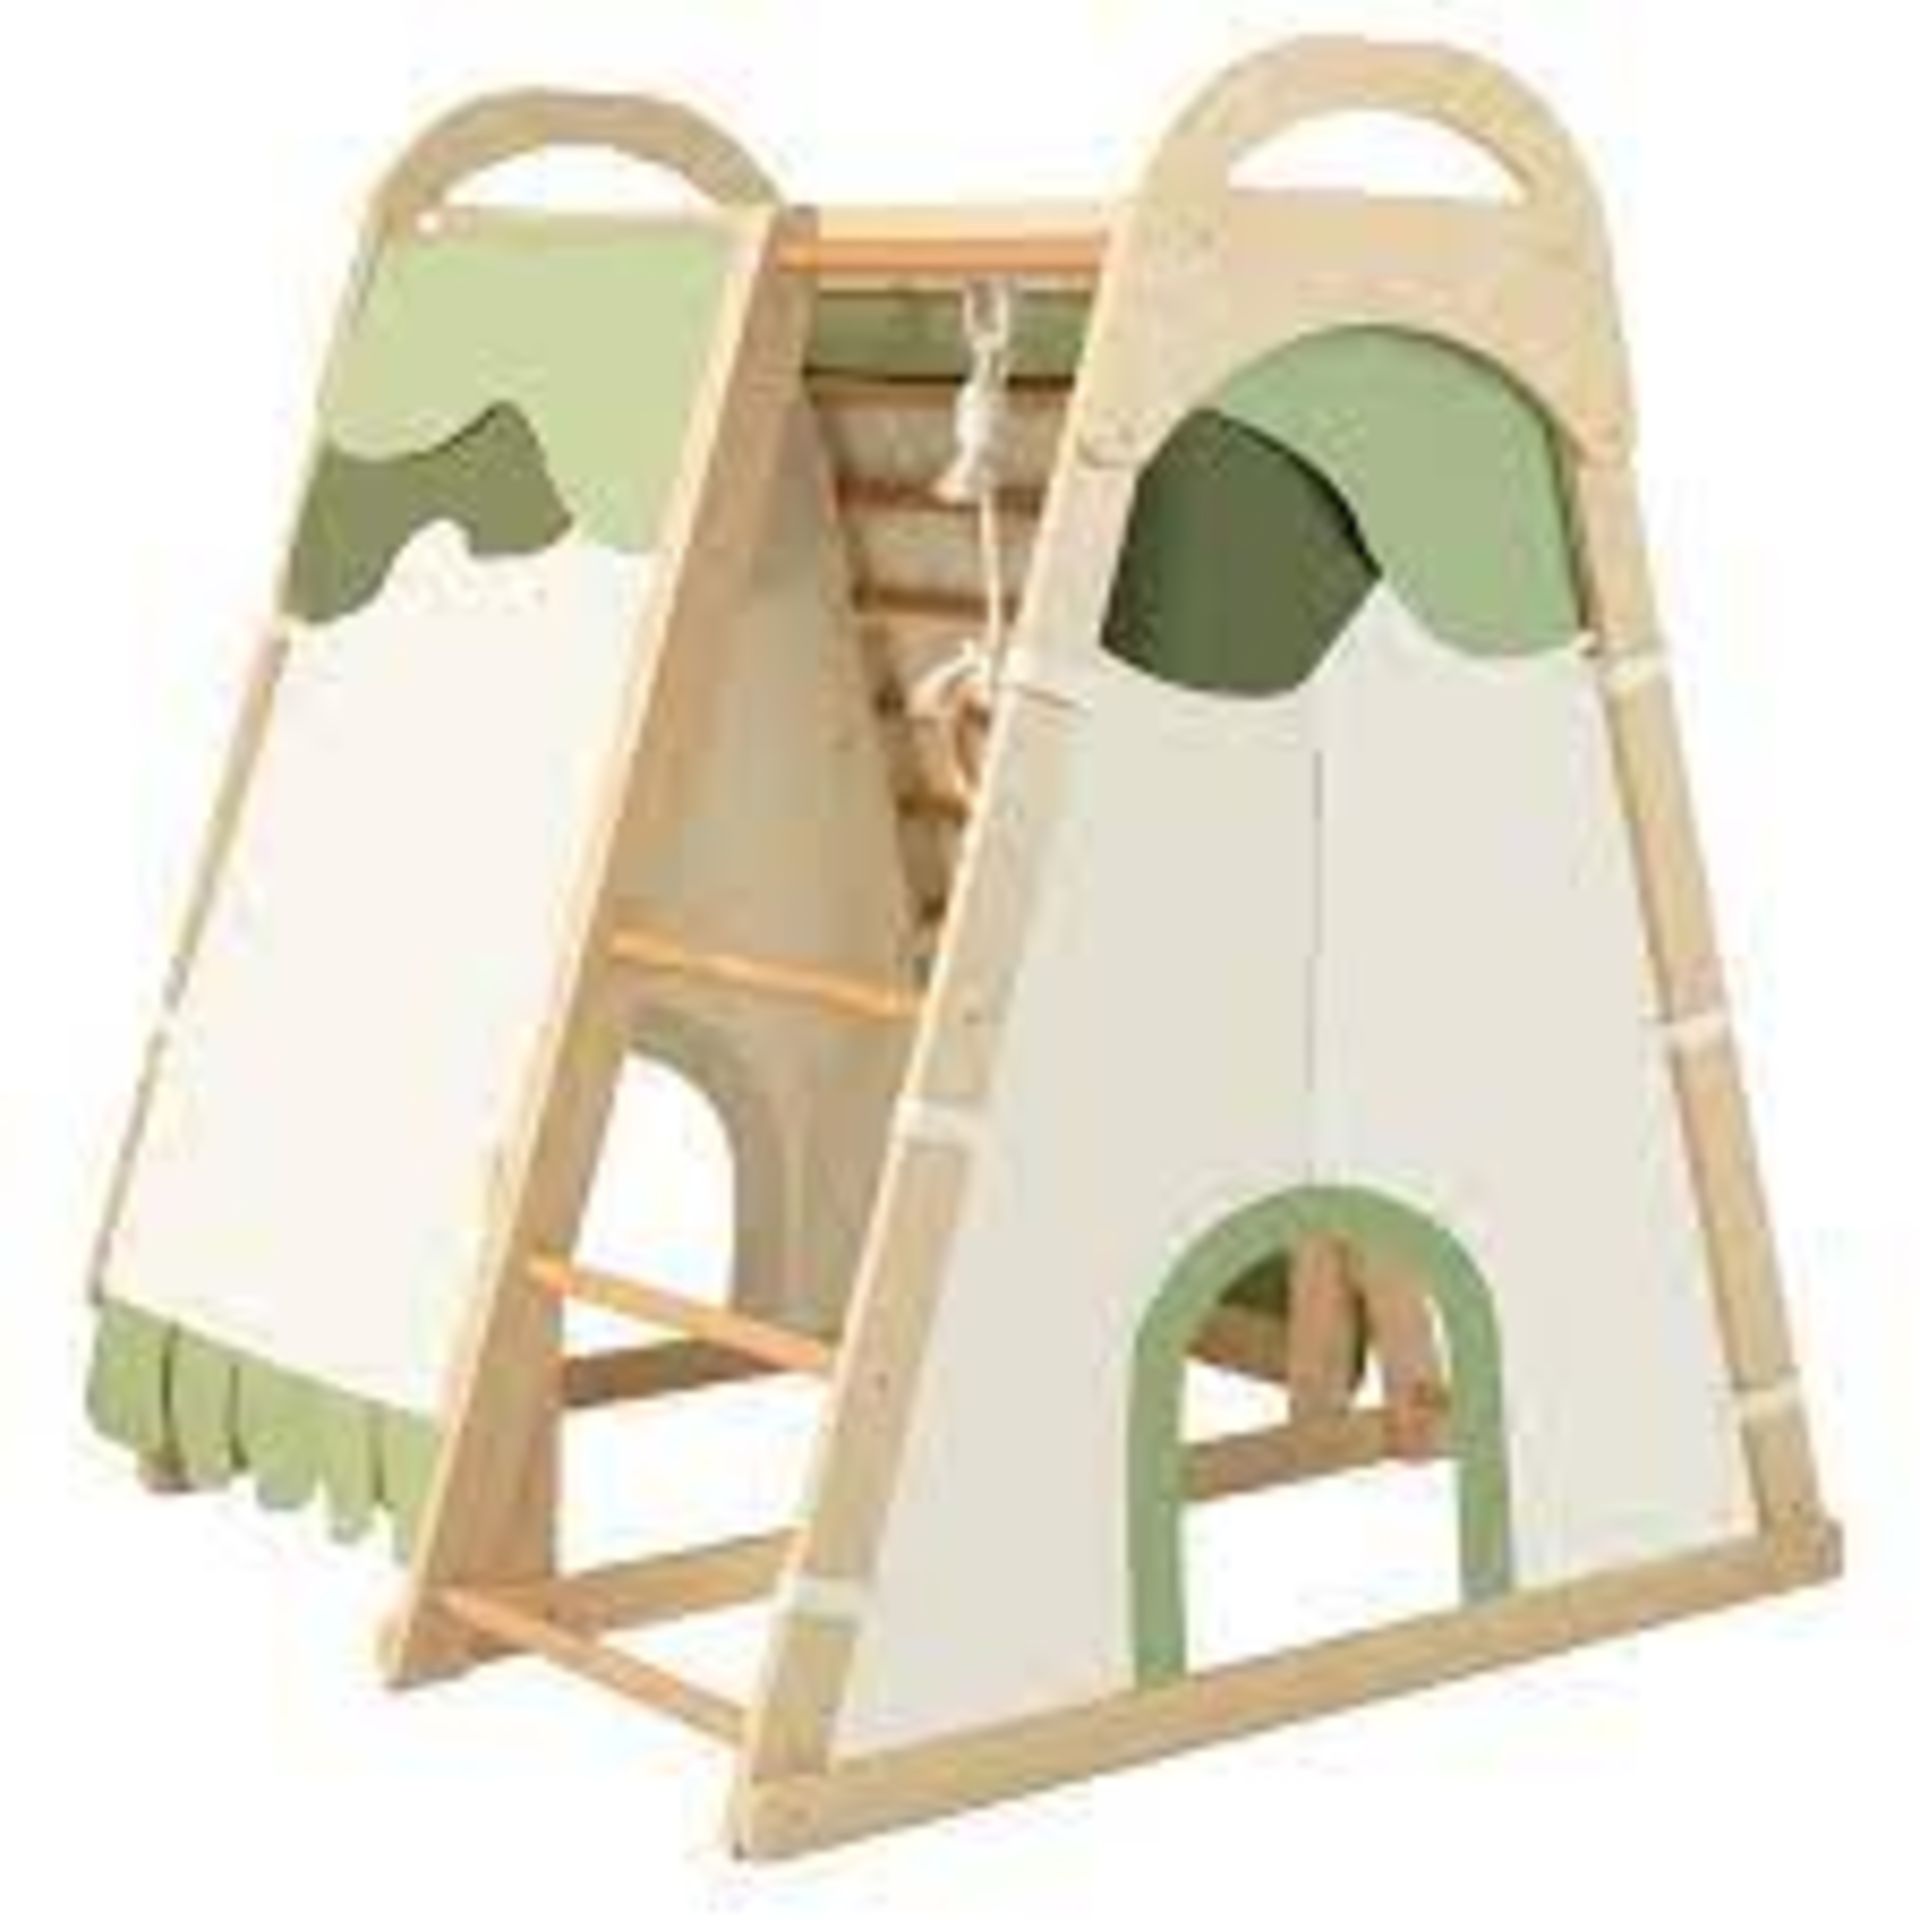 6-in-1 Kids Indoor Playground with Slide for Toddlers over 1 Year Old-Natural - ER54